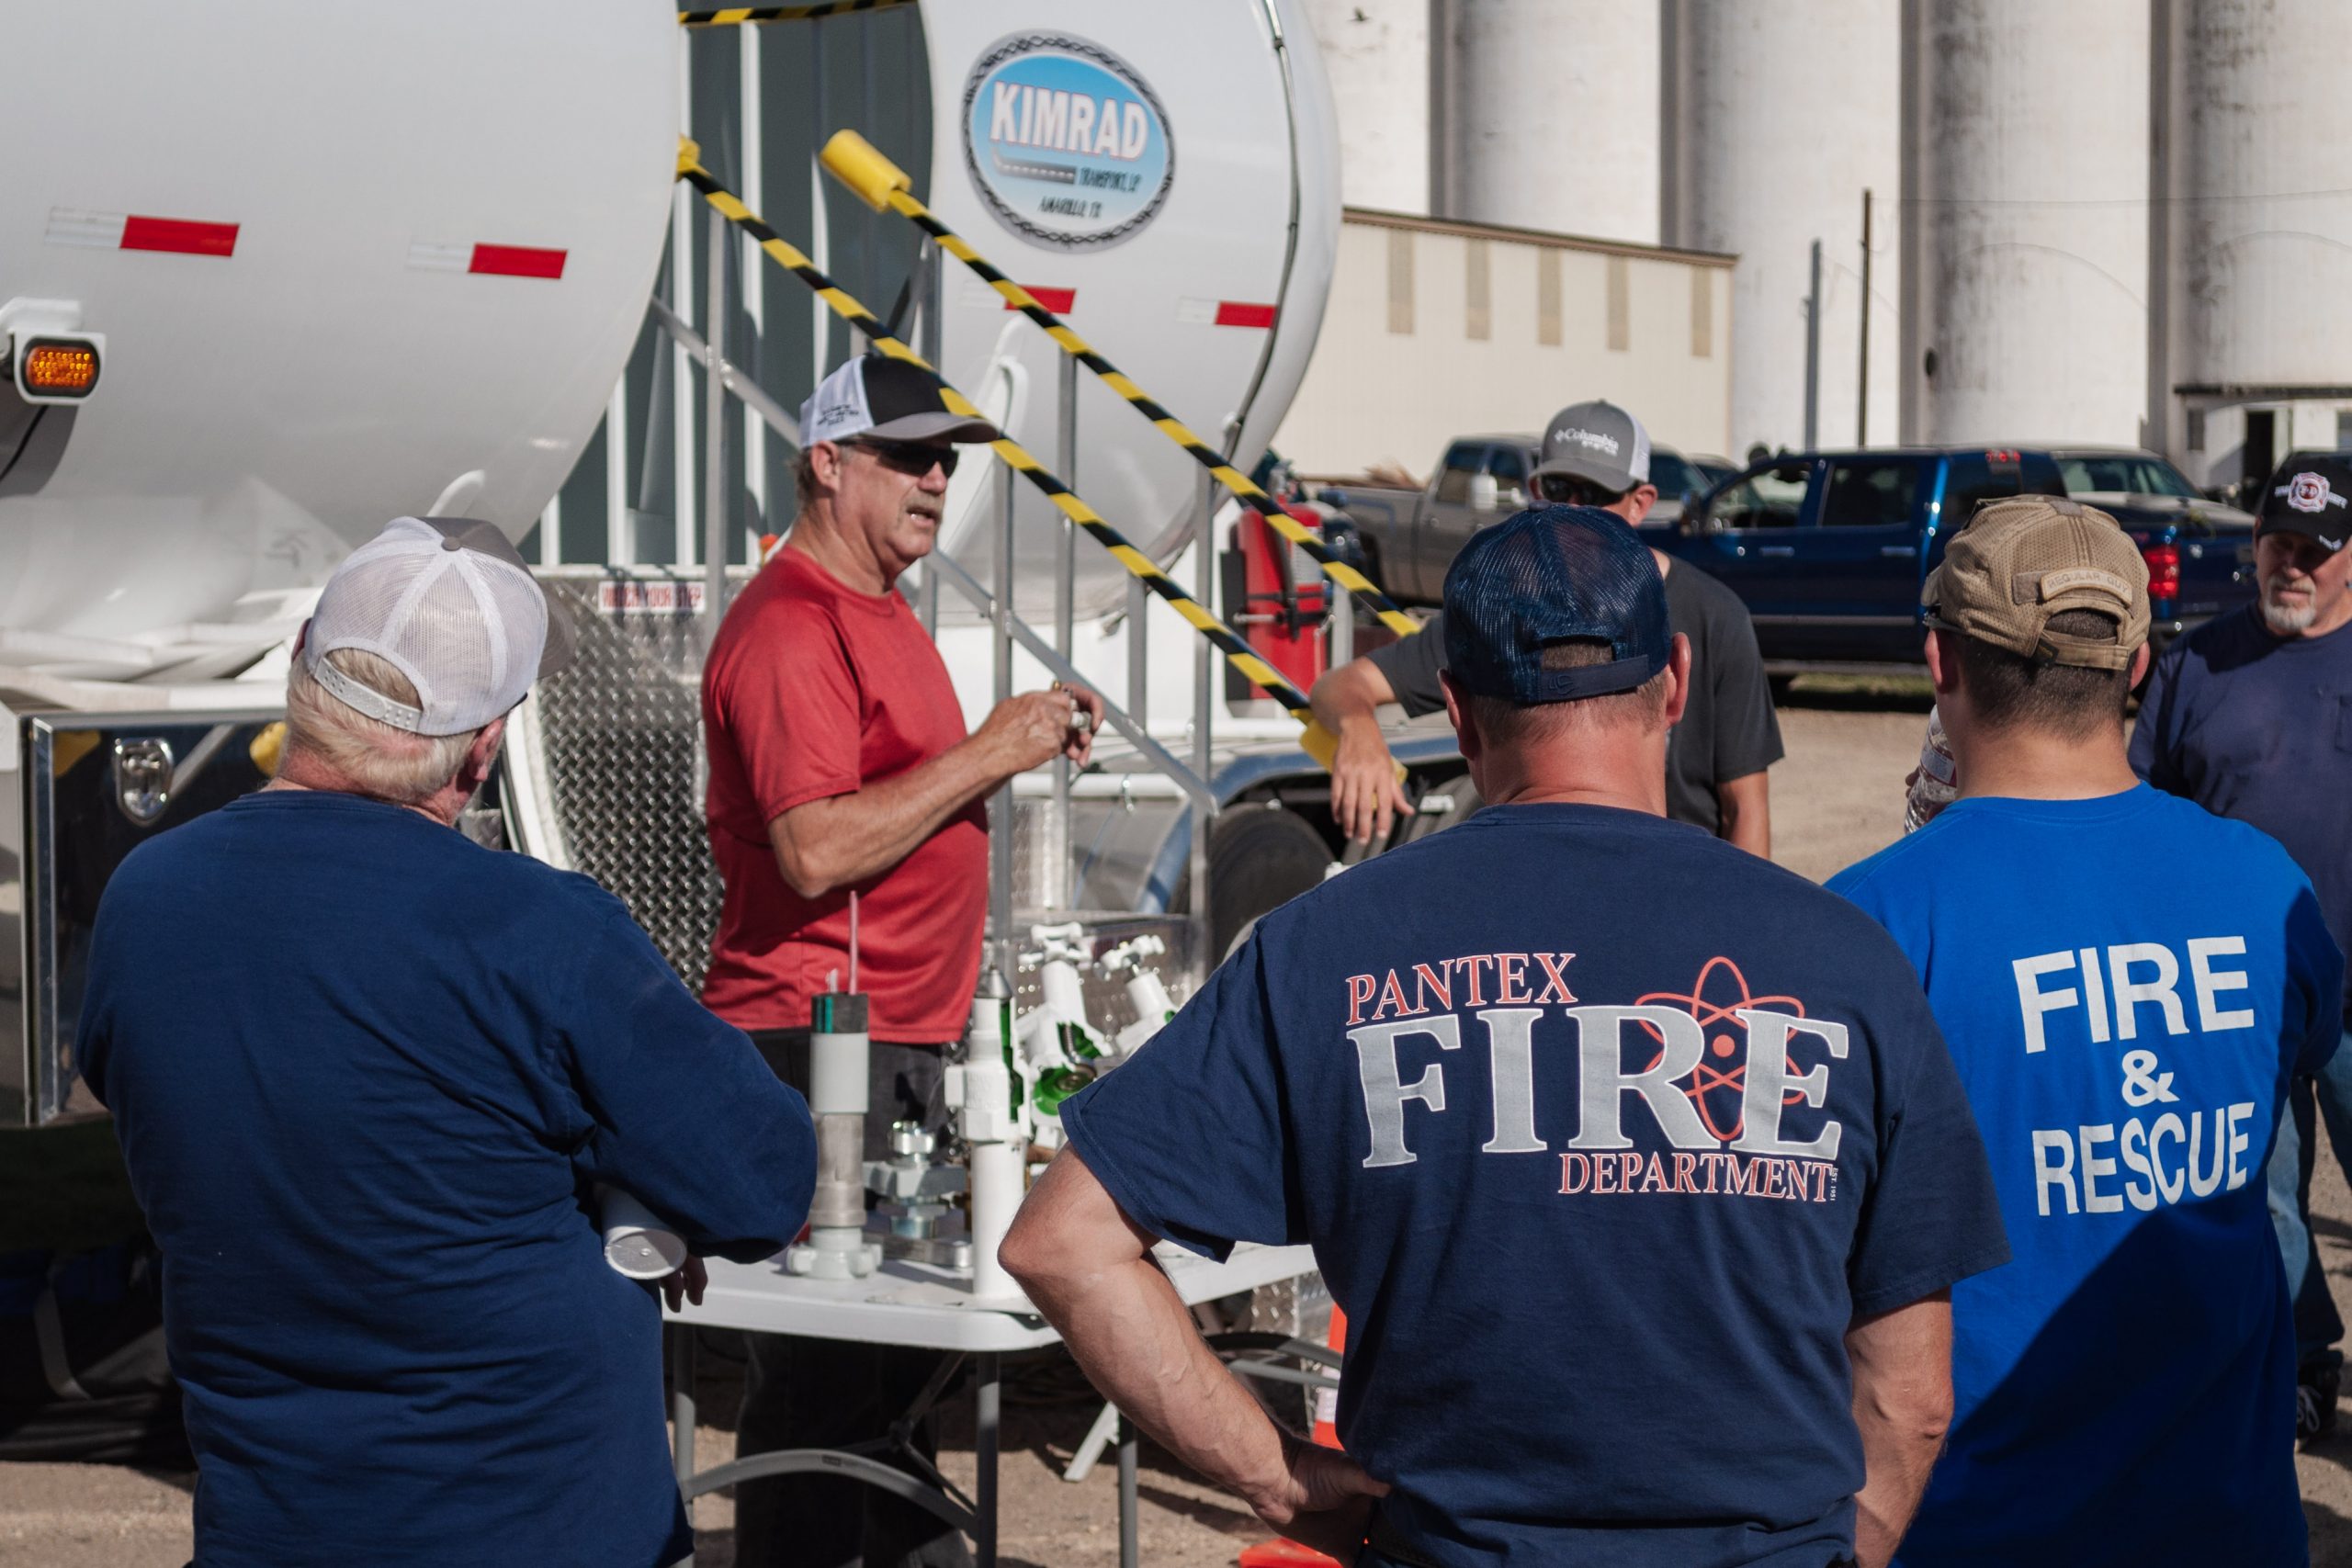 Max from Kimrad Transport trains local local law enforcement and emergency service providers on anhydrous/propane trailer safety